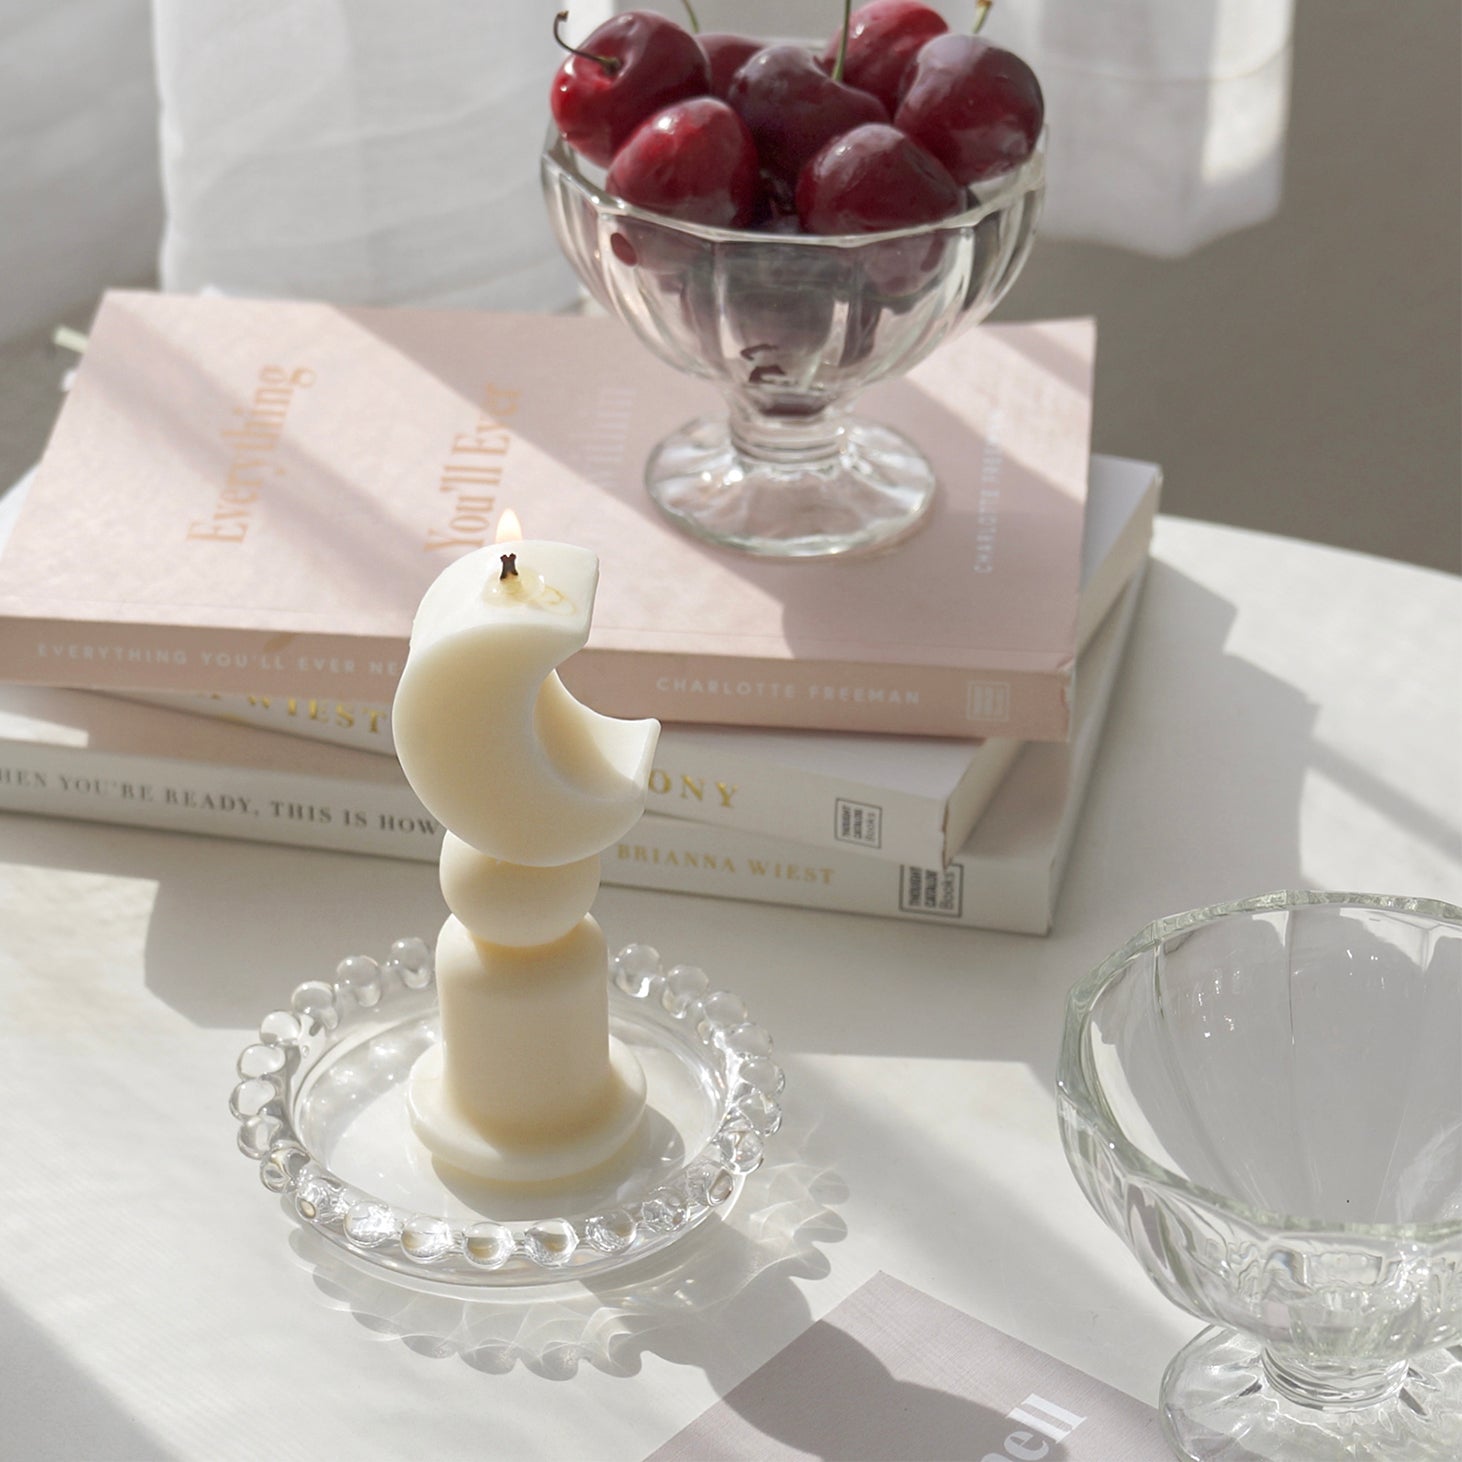 a lit crescent moon shape candles and cherries in a clear ice cream bowl on stacked books are placed on white table. The arrangement exudes minimal aesthetic dreamy vibes.